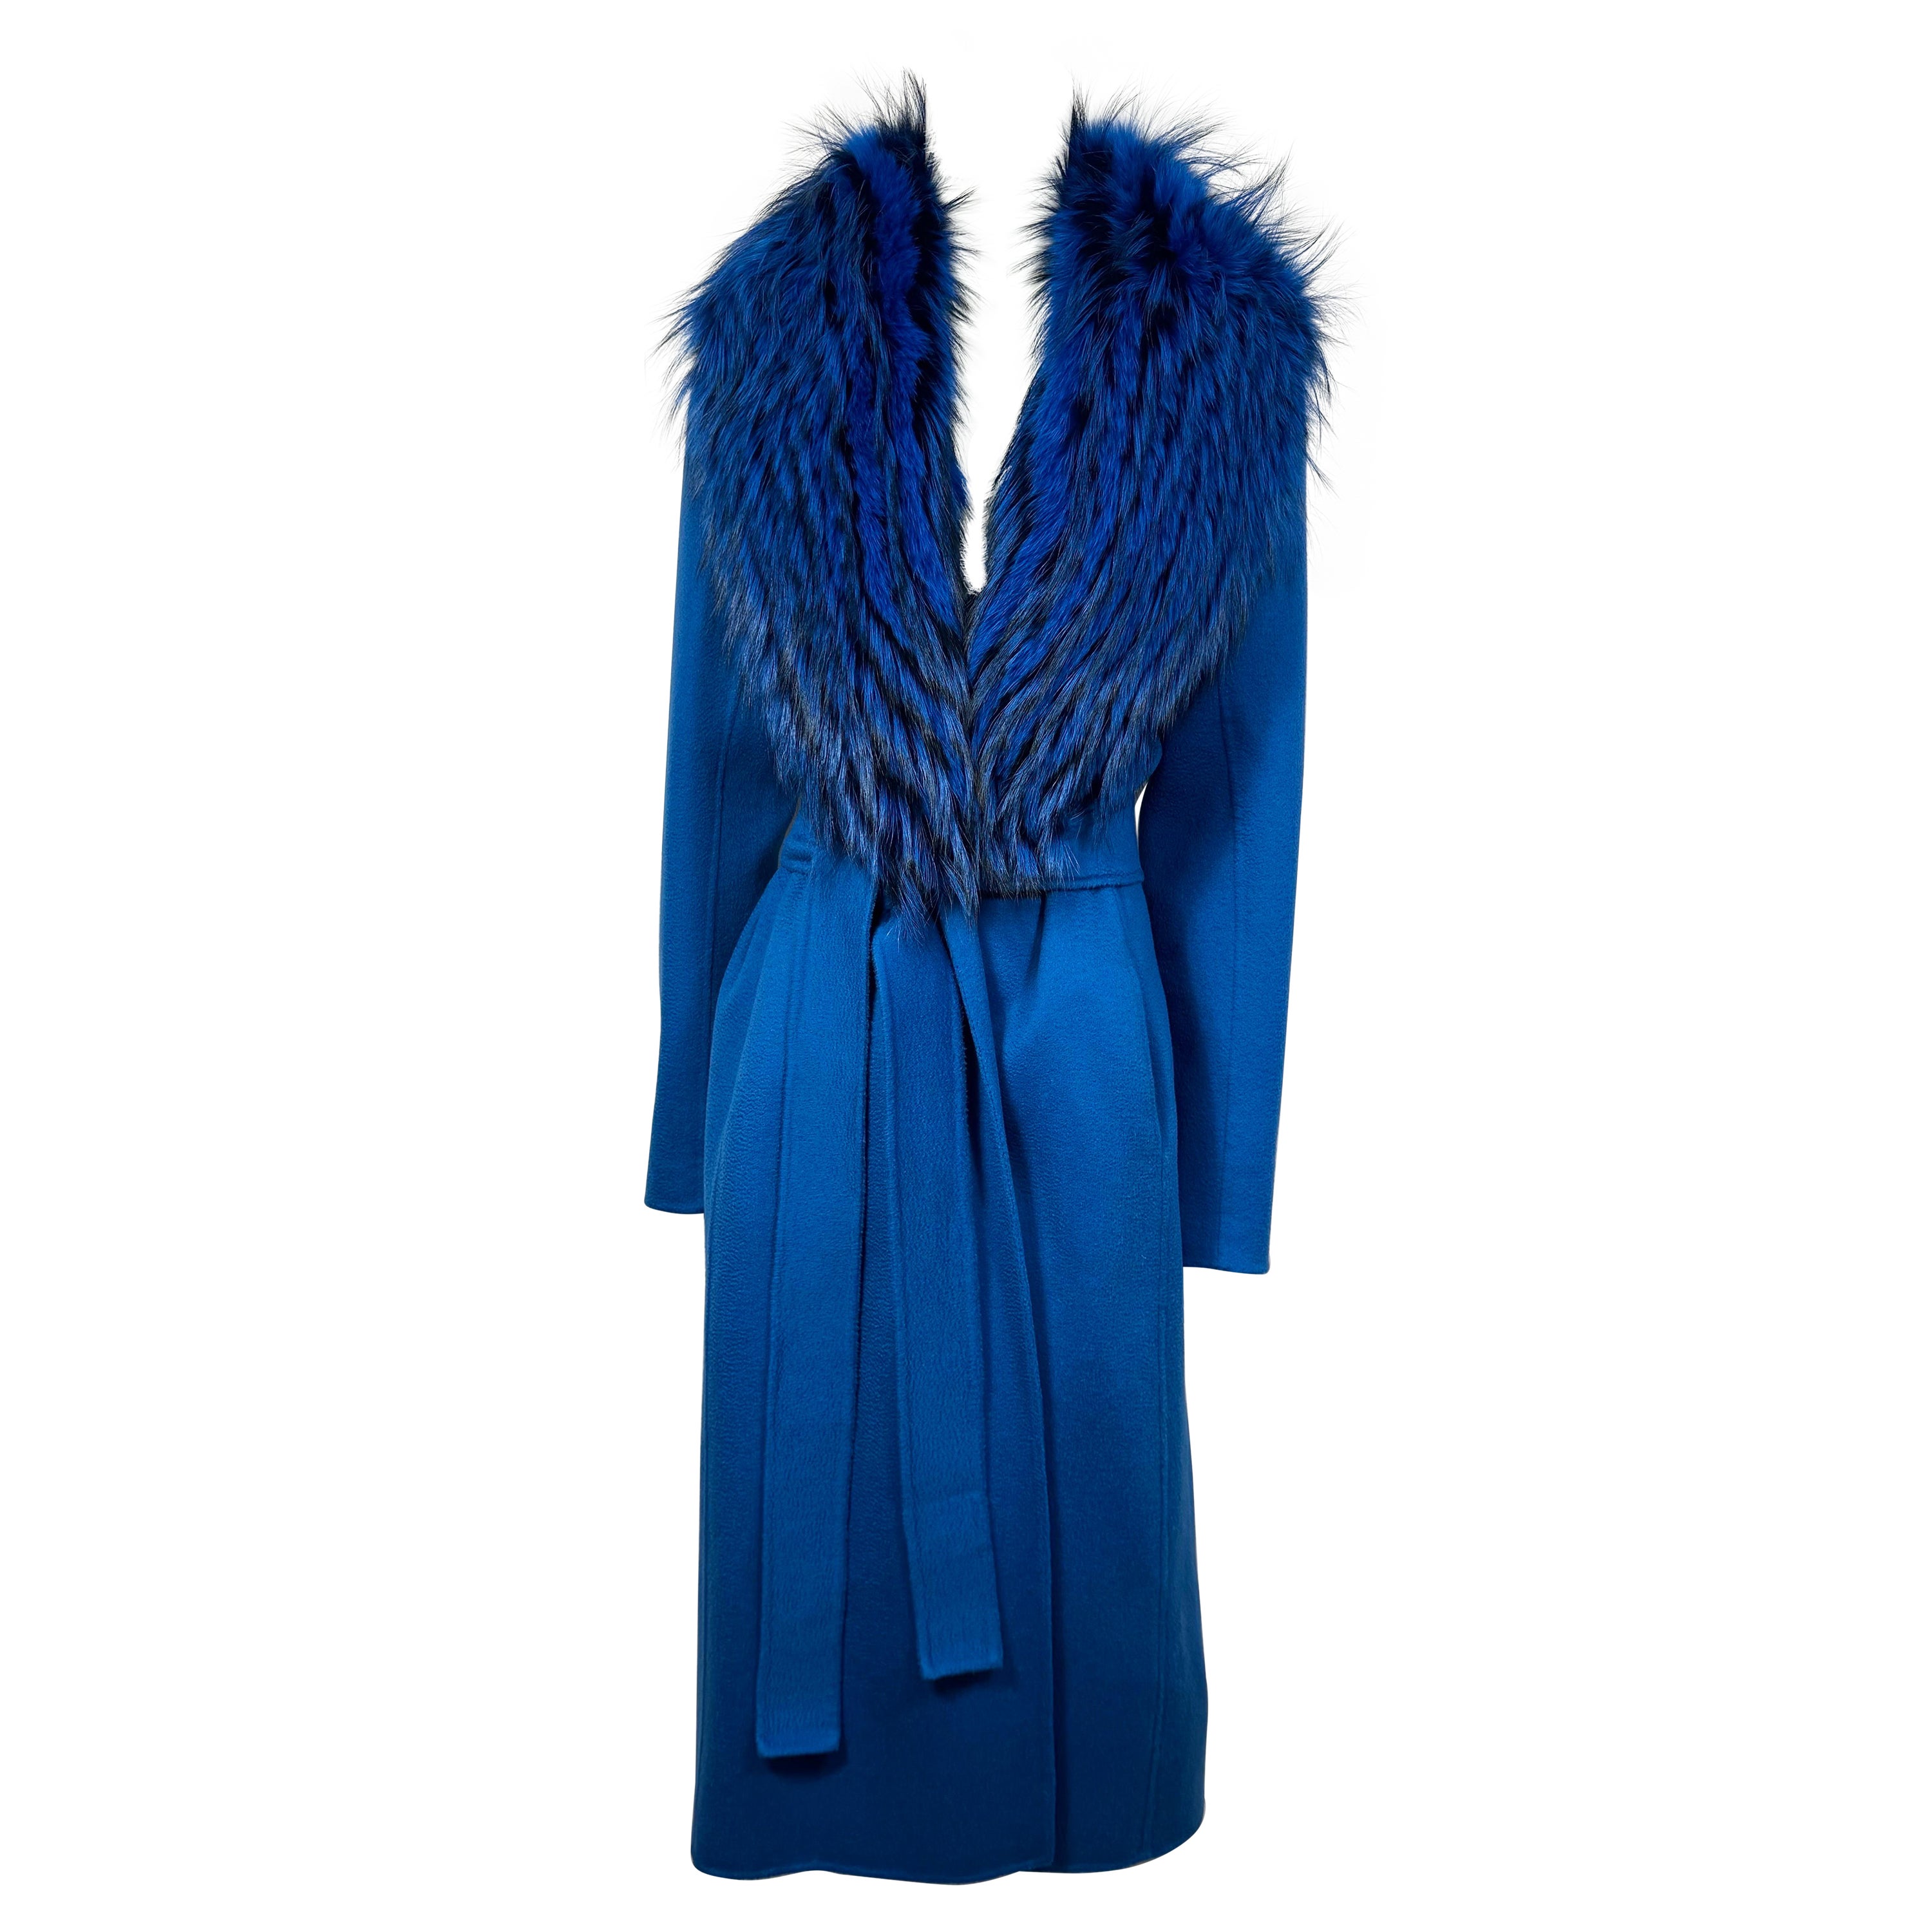 J Mendel Runway Fall 2016 Azure Cashmere Coat with Fox Fur Collar-Size Small-NWT For Sale